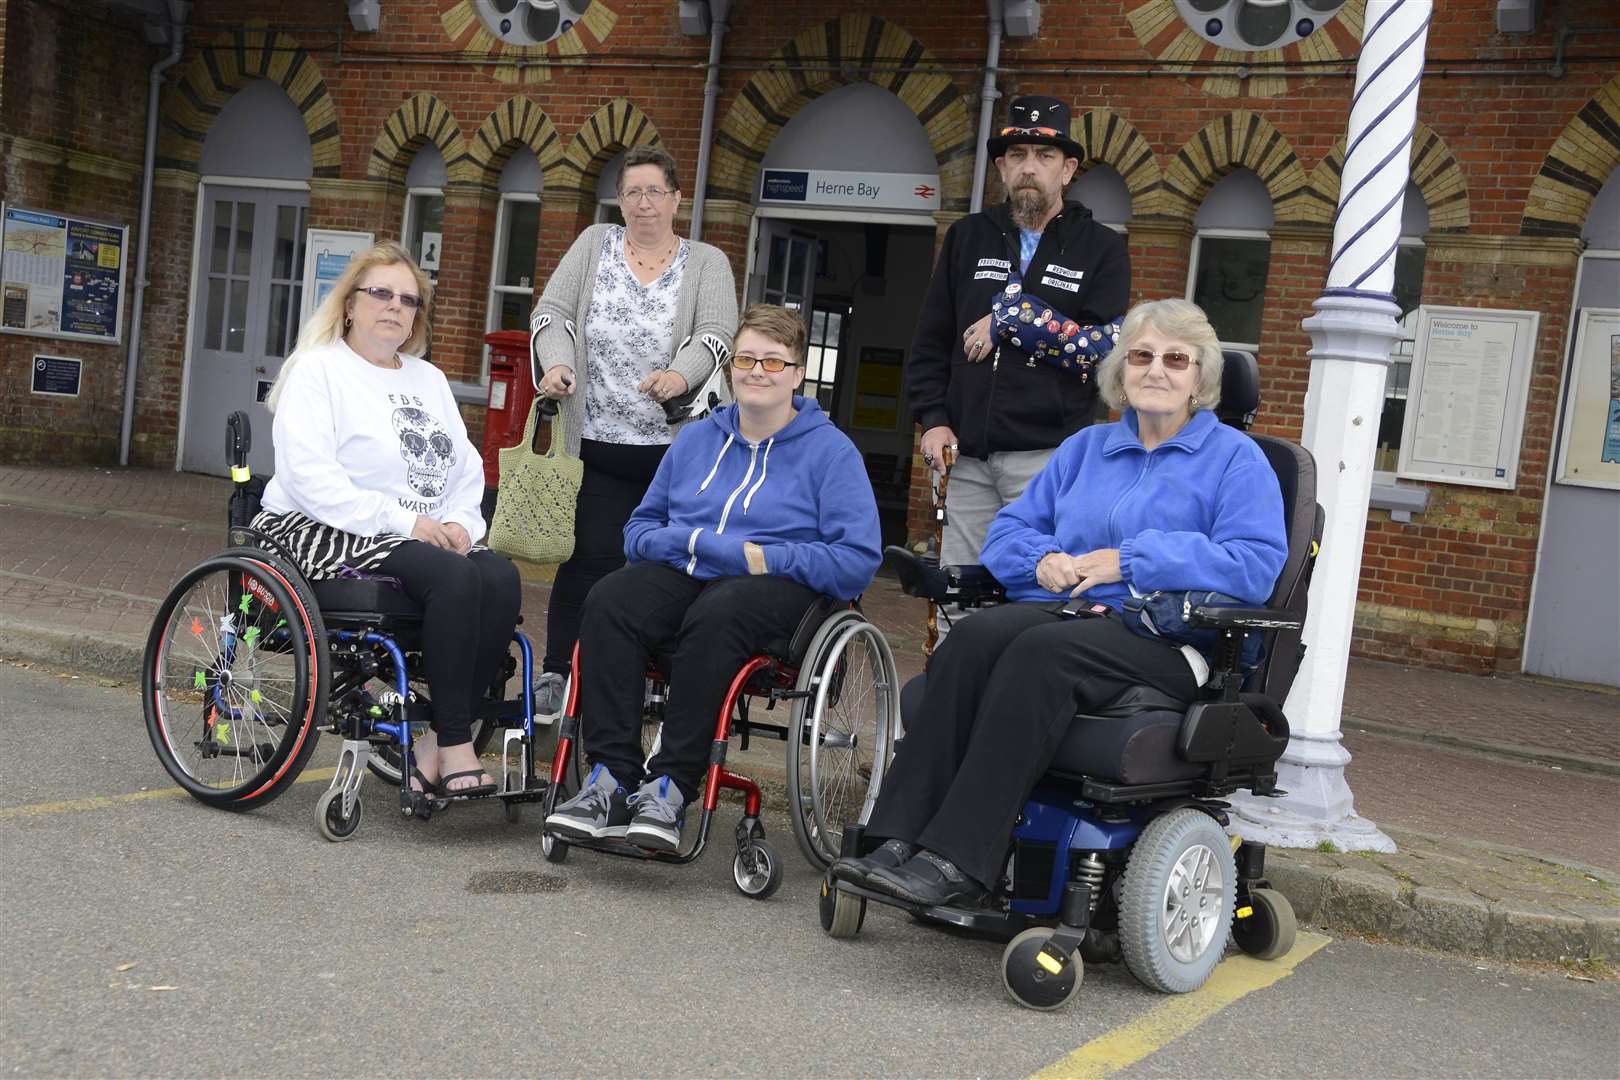 Jacky Woods, Louise Lavell, Layla Parson, Craig Foster and Sheila Appleton have all encountered problems at Herne Bay railway station